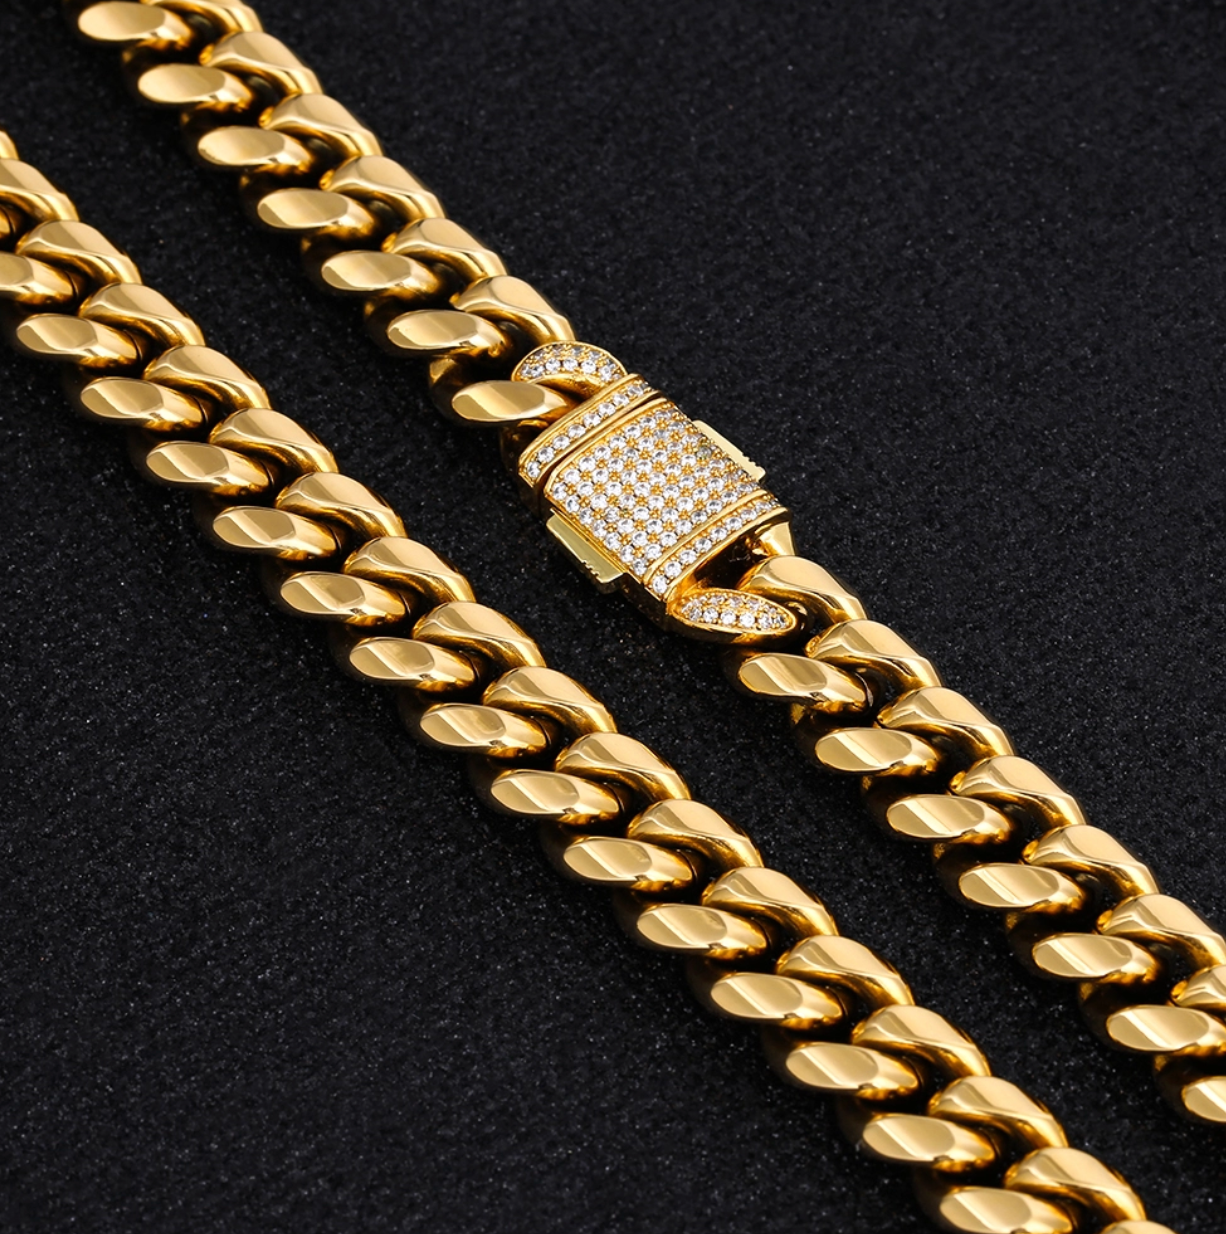 12mm Multicolored Cuban Link Chain